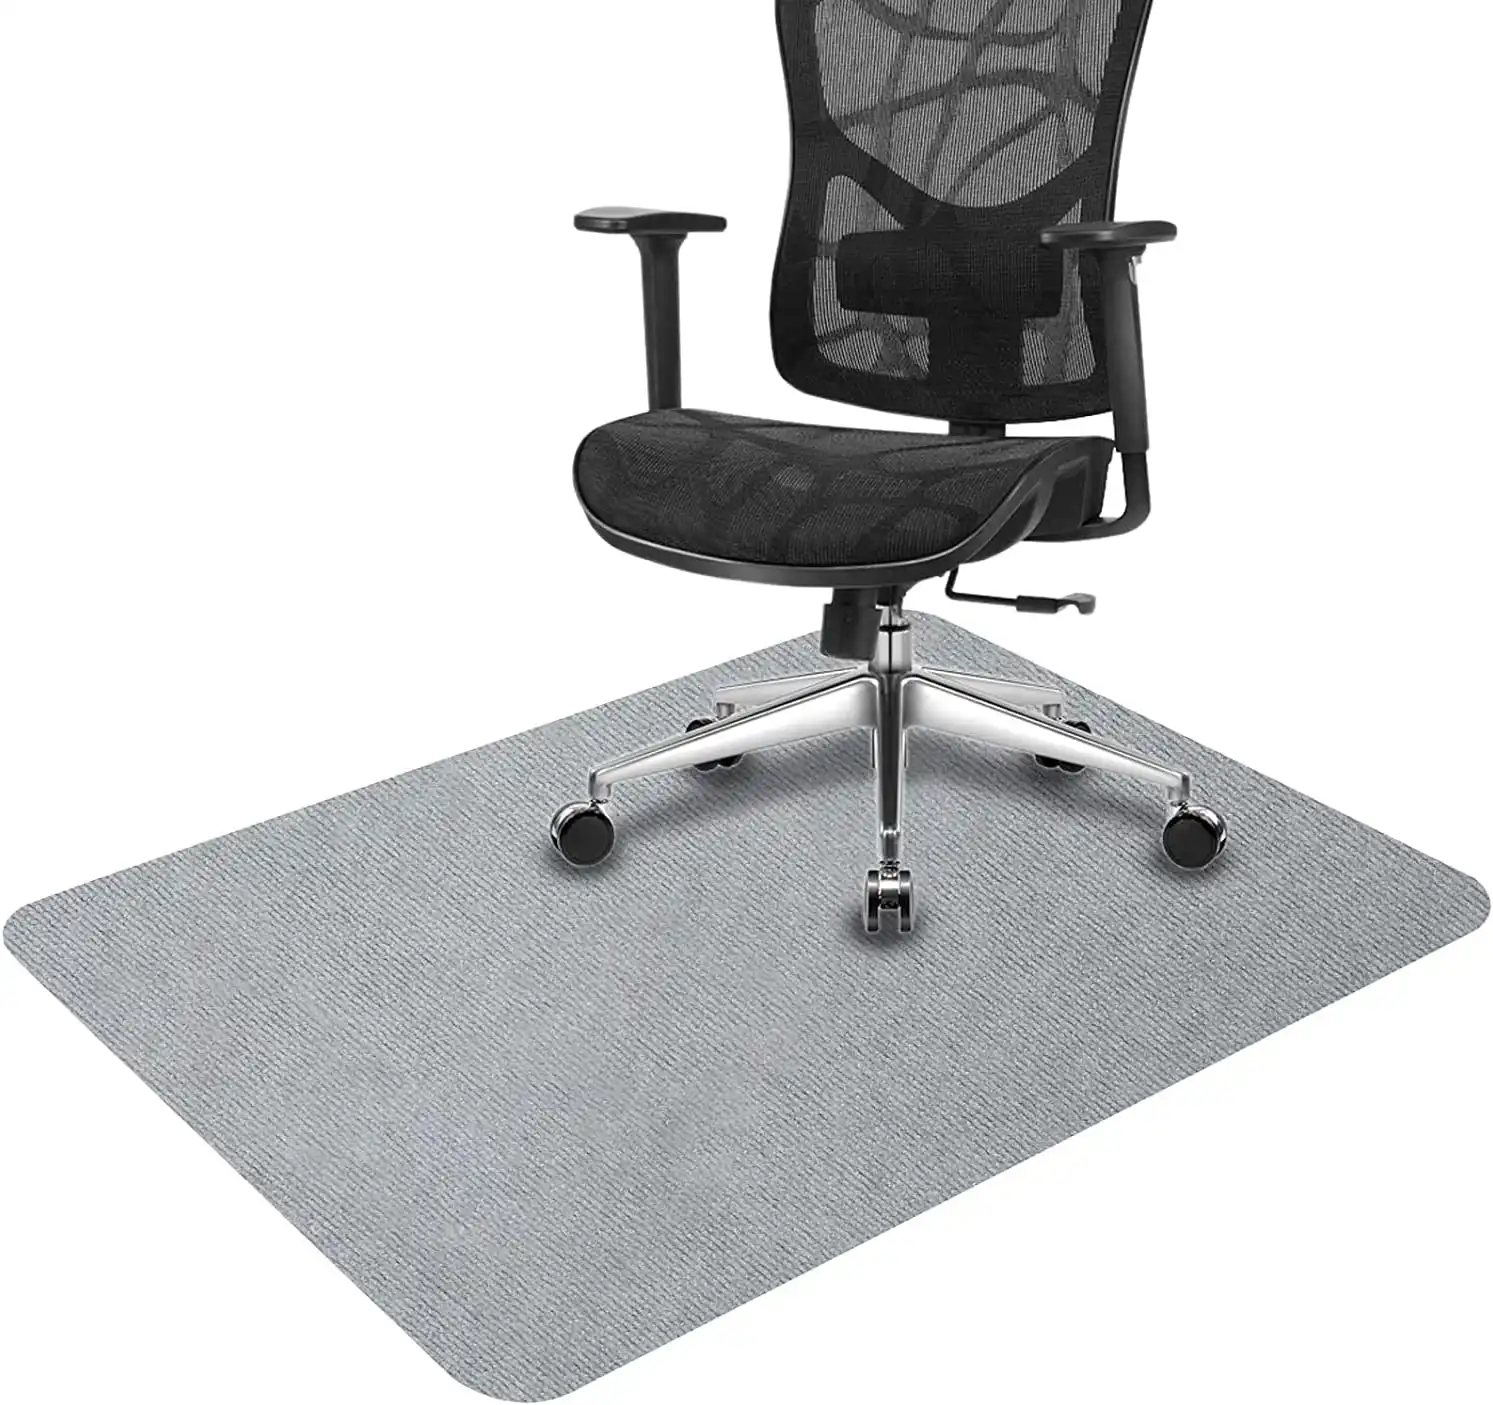 Chair Mat for Rolling Chair,90x140cm, Folded Package (Grey)